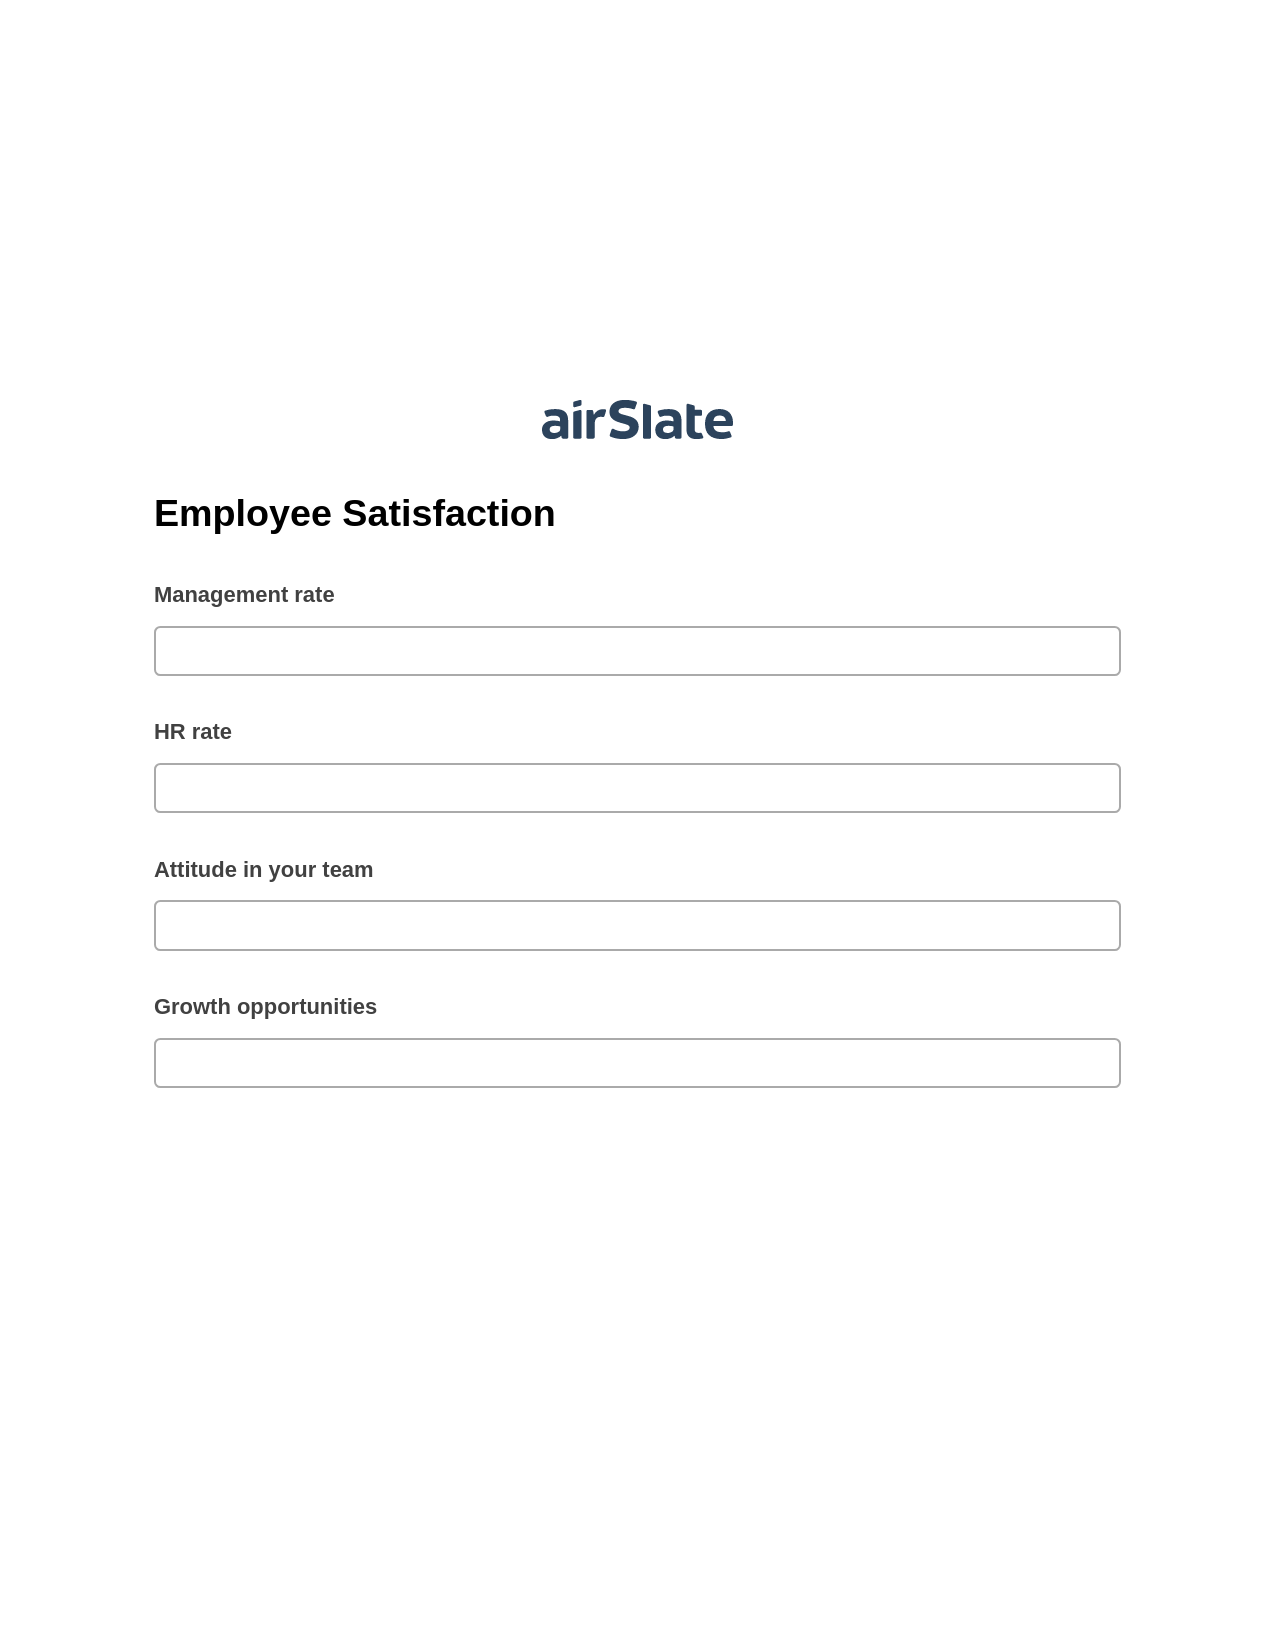 Employee Satisfaction Pre-fill from CSV File Bot, Google Cloud Print Bot, Email Notification Postfinish Bot